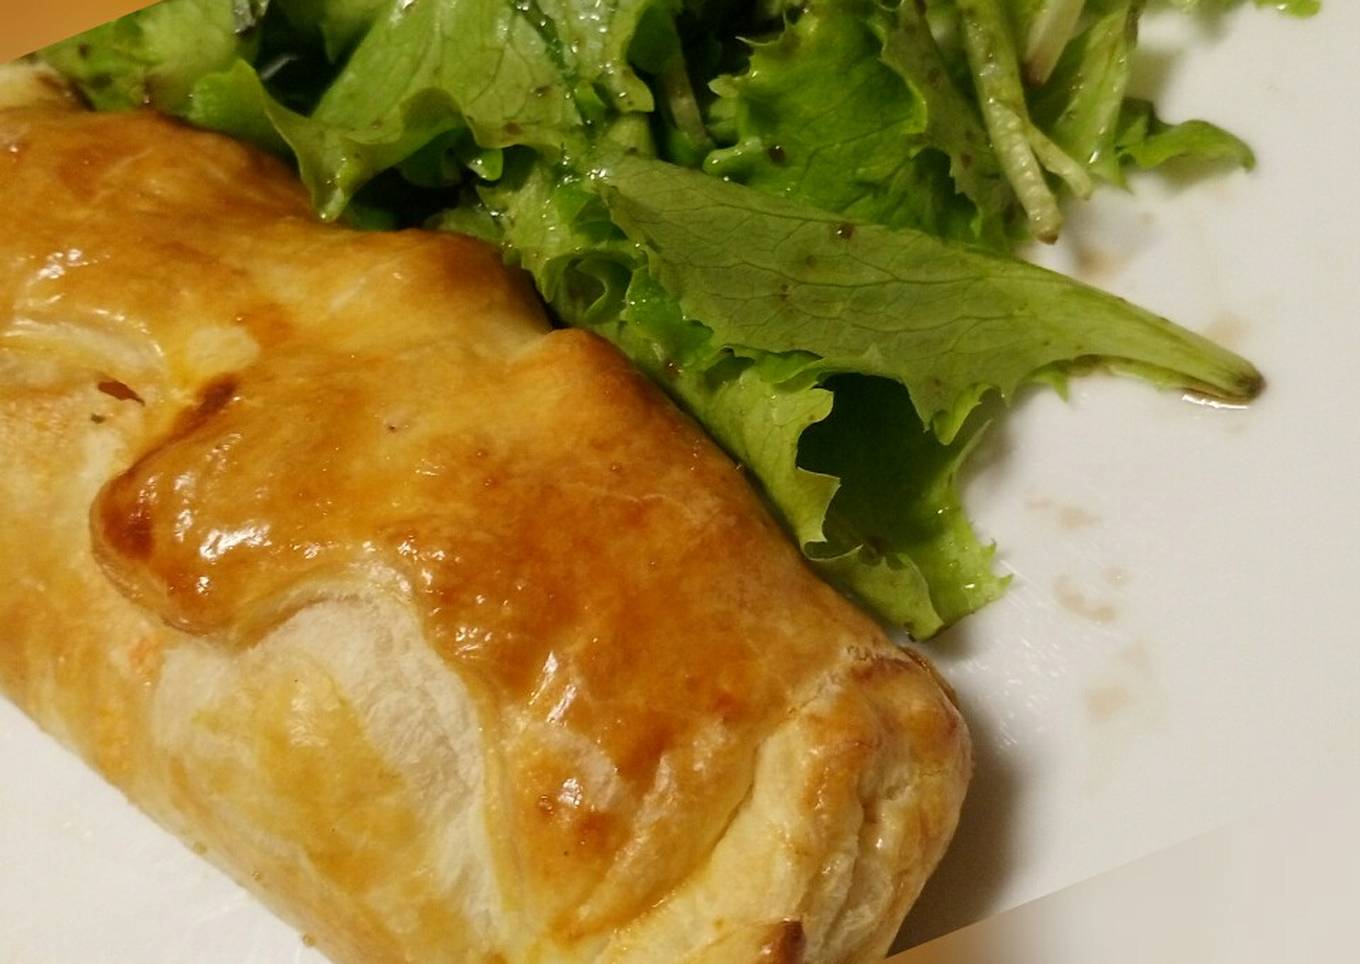 Chicken and feta pastry parcels